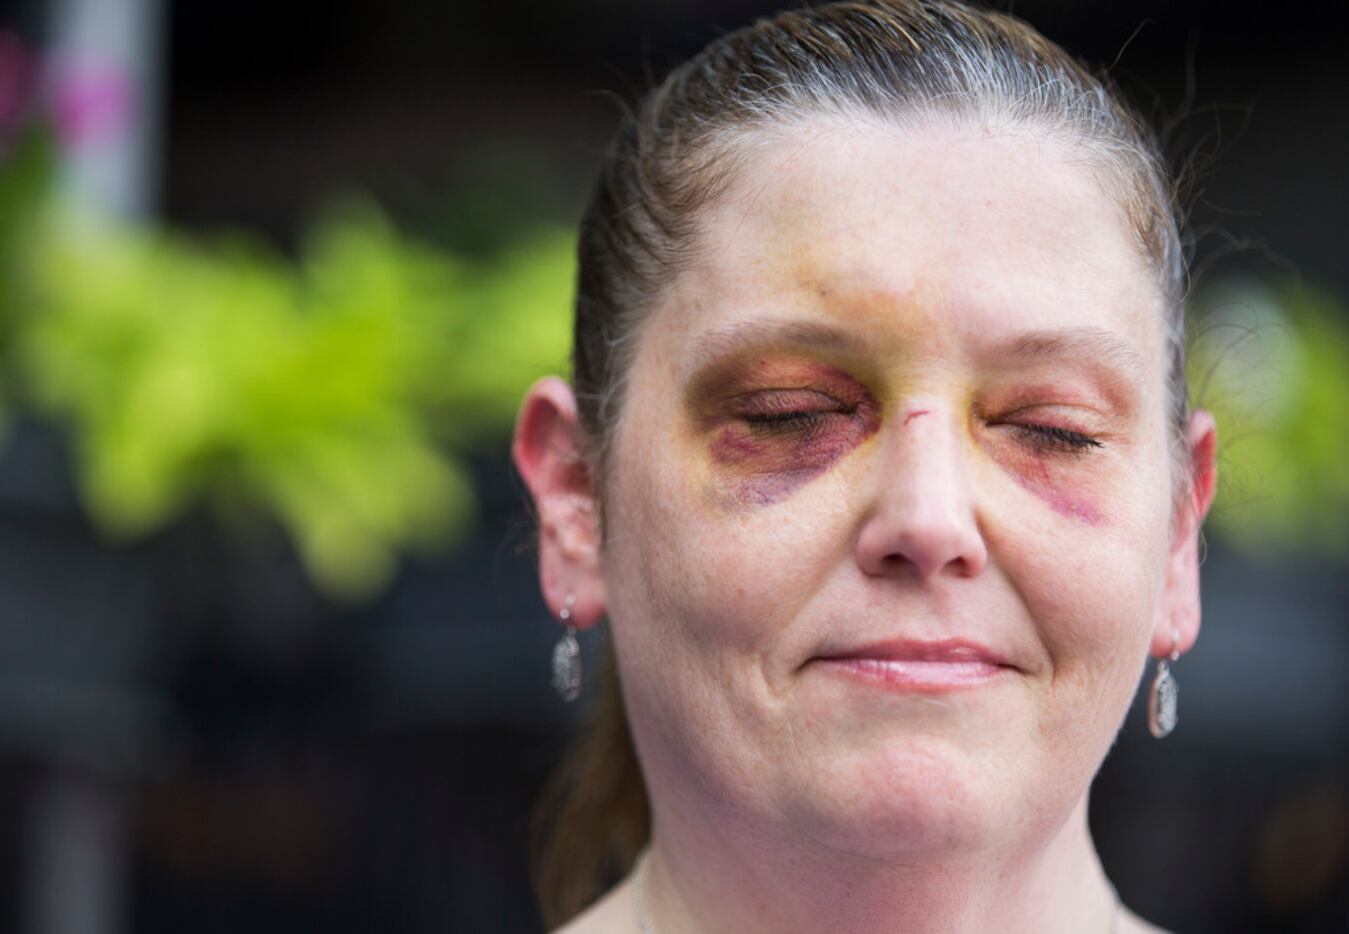 Kelley Mitchum showed her injuries from falling off of a Lime scooter while crossing over...